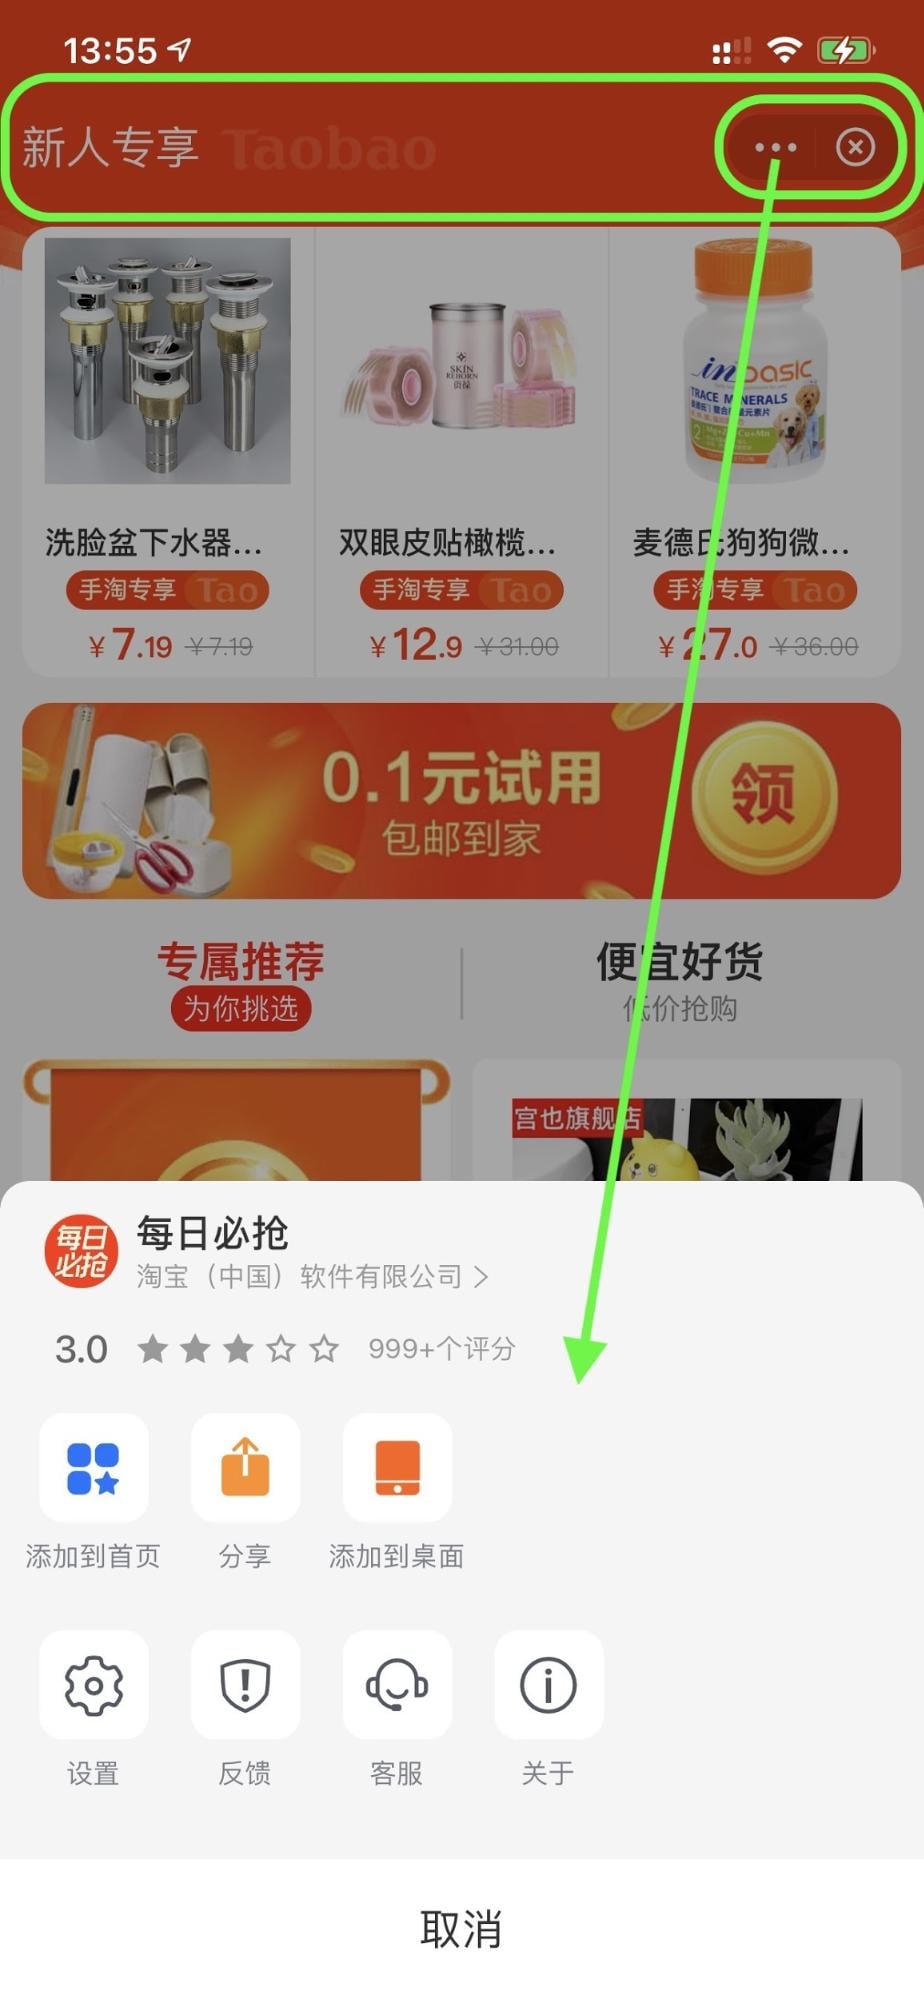 The Alipay super app running a shopping mini app with highlighted top bar, action menu button, and close button. The action menu is opened.